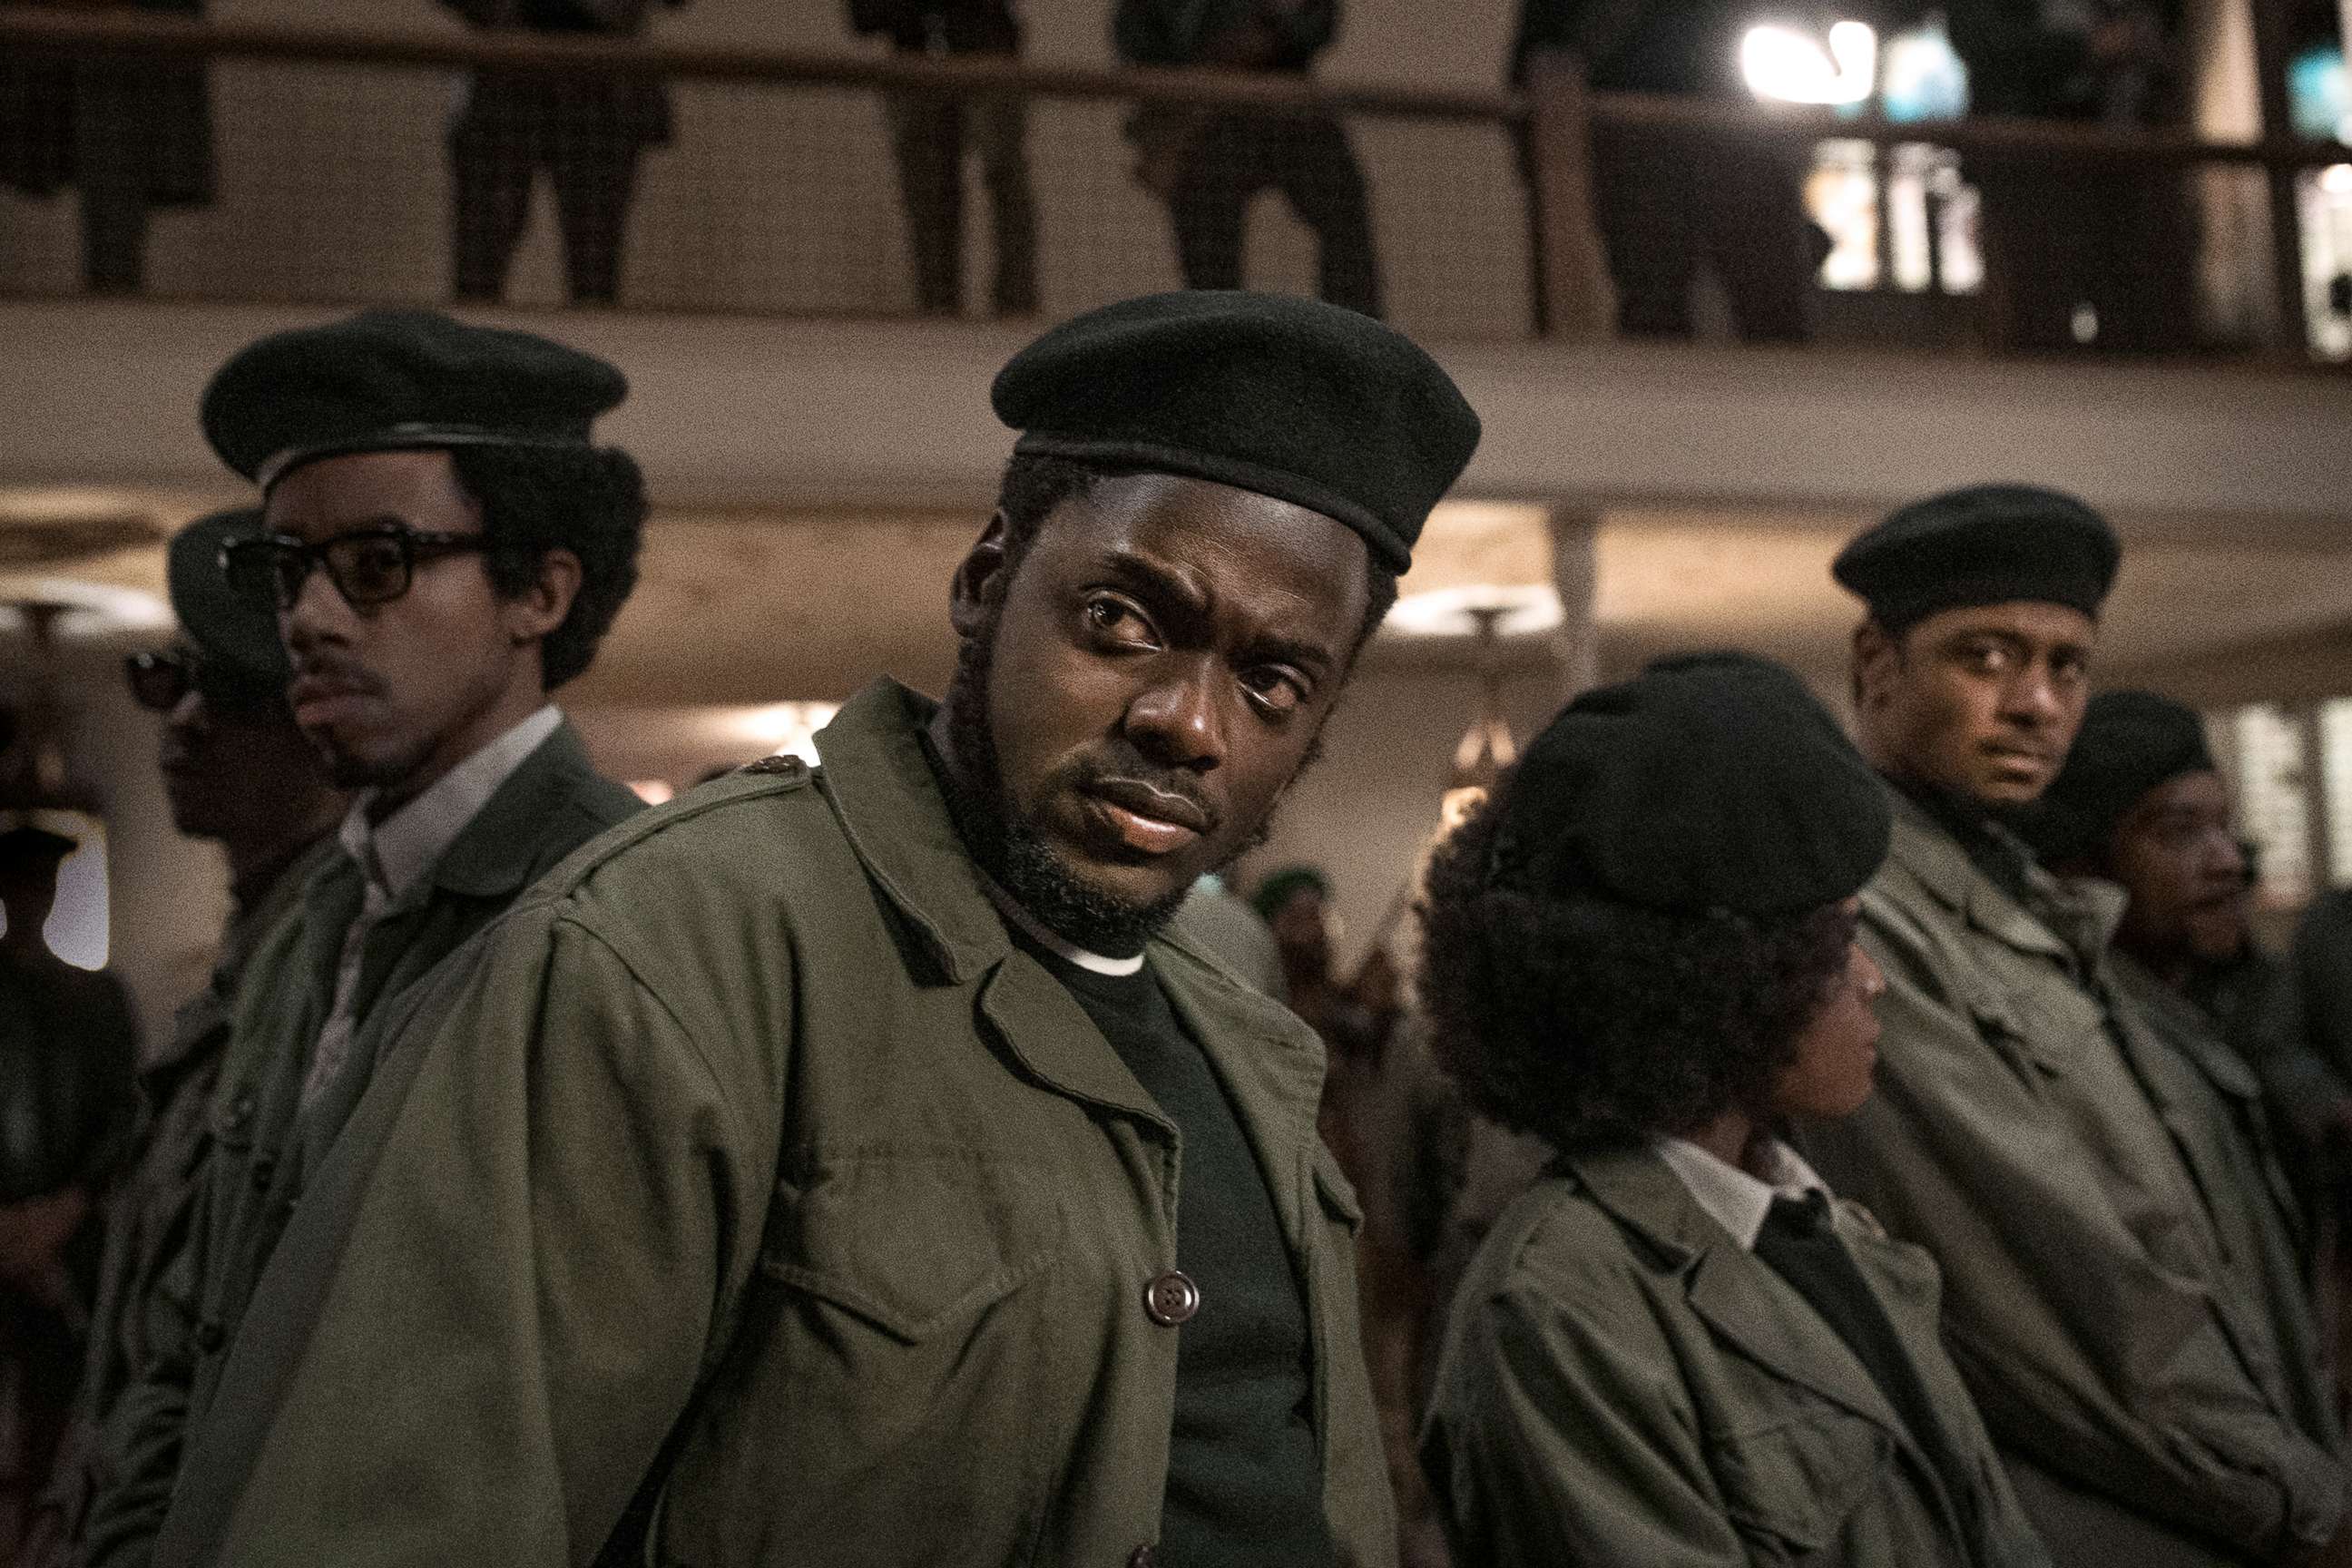 PHOTO: From left, Darrel Britt-Gibson as Bobby Rush, Daniel Kaluuya as Chairman Fred Hampton and Lakeith Stanfield as Bill O'Neal in the film, "Judas and the Black Messiah."